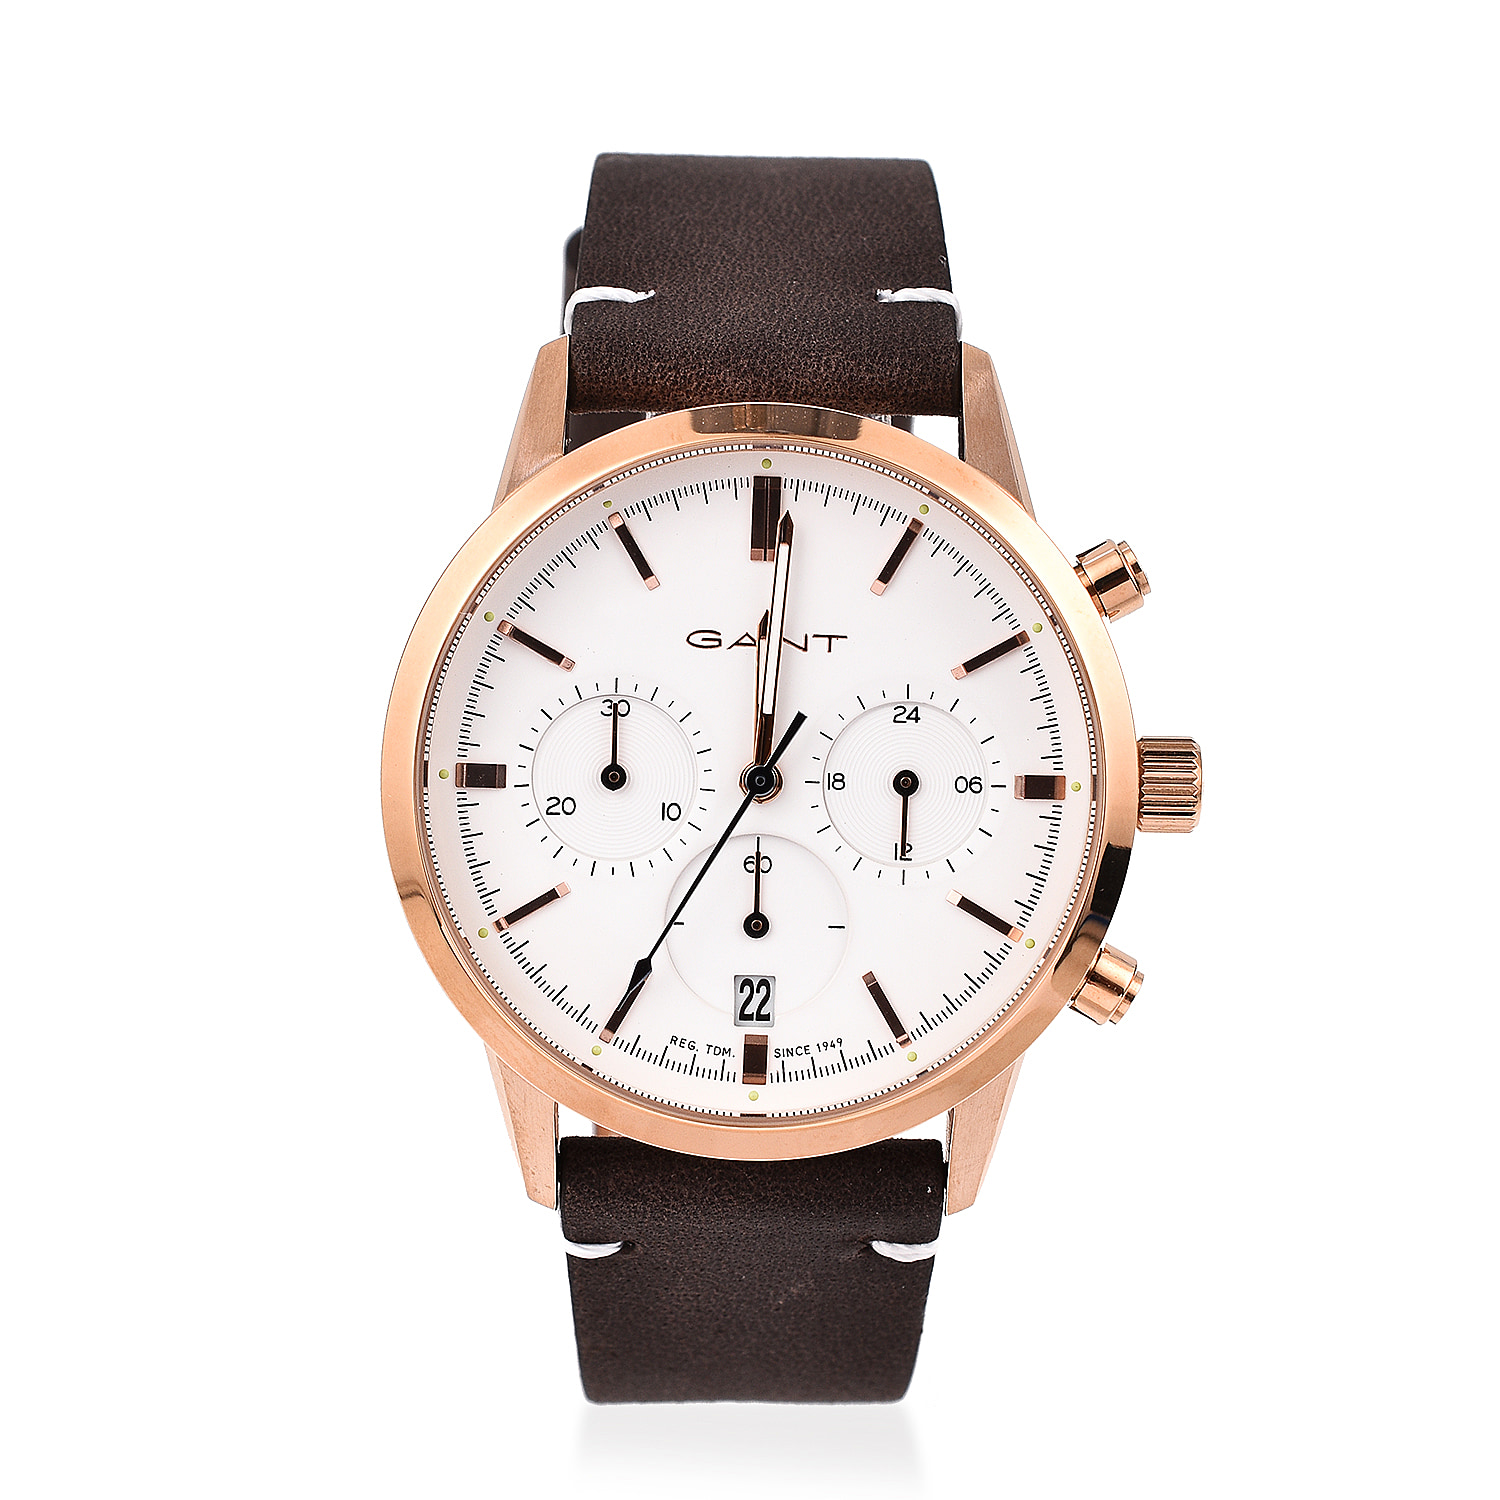 GANT-BRADFORD-Rose-Gold-Dial-Water-Resistant-Watch-with-Brown-Leather-